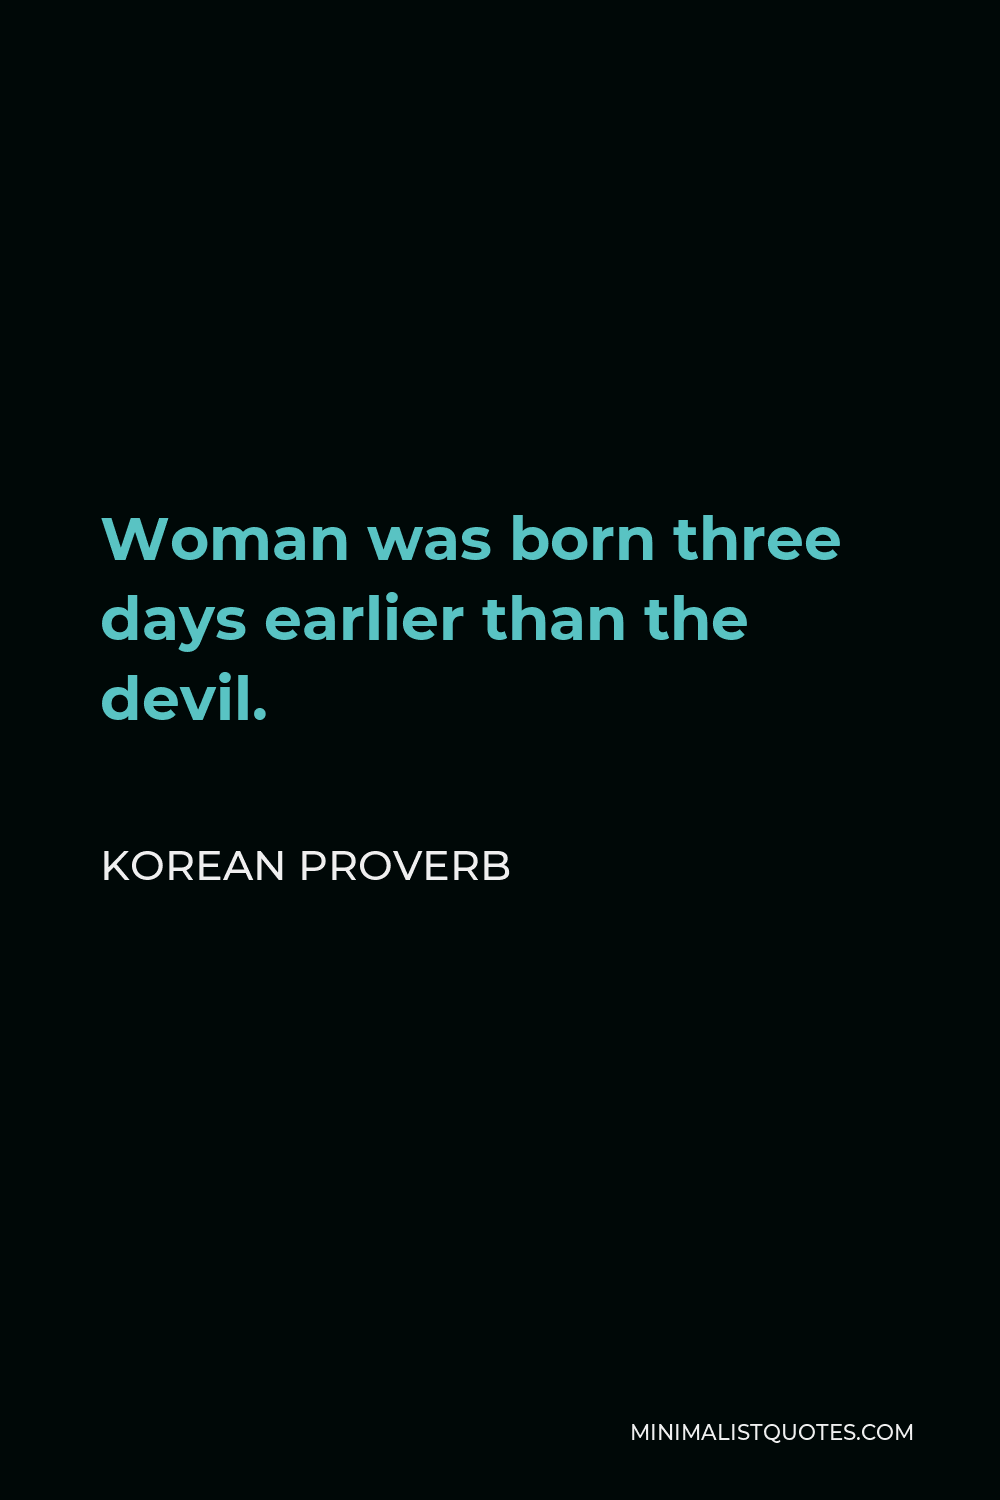 Korean Proverb Quote - Woman was born three days earlier than the devil.